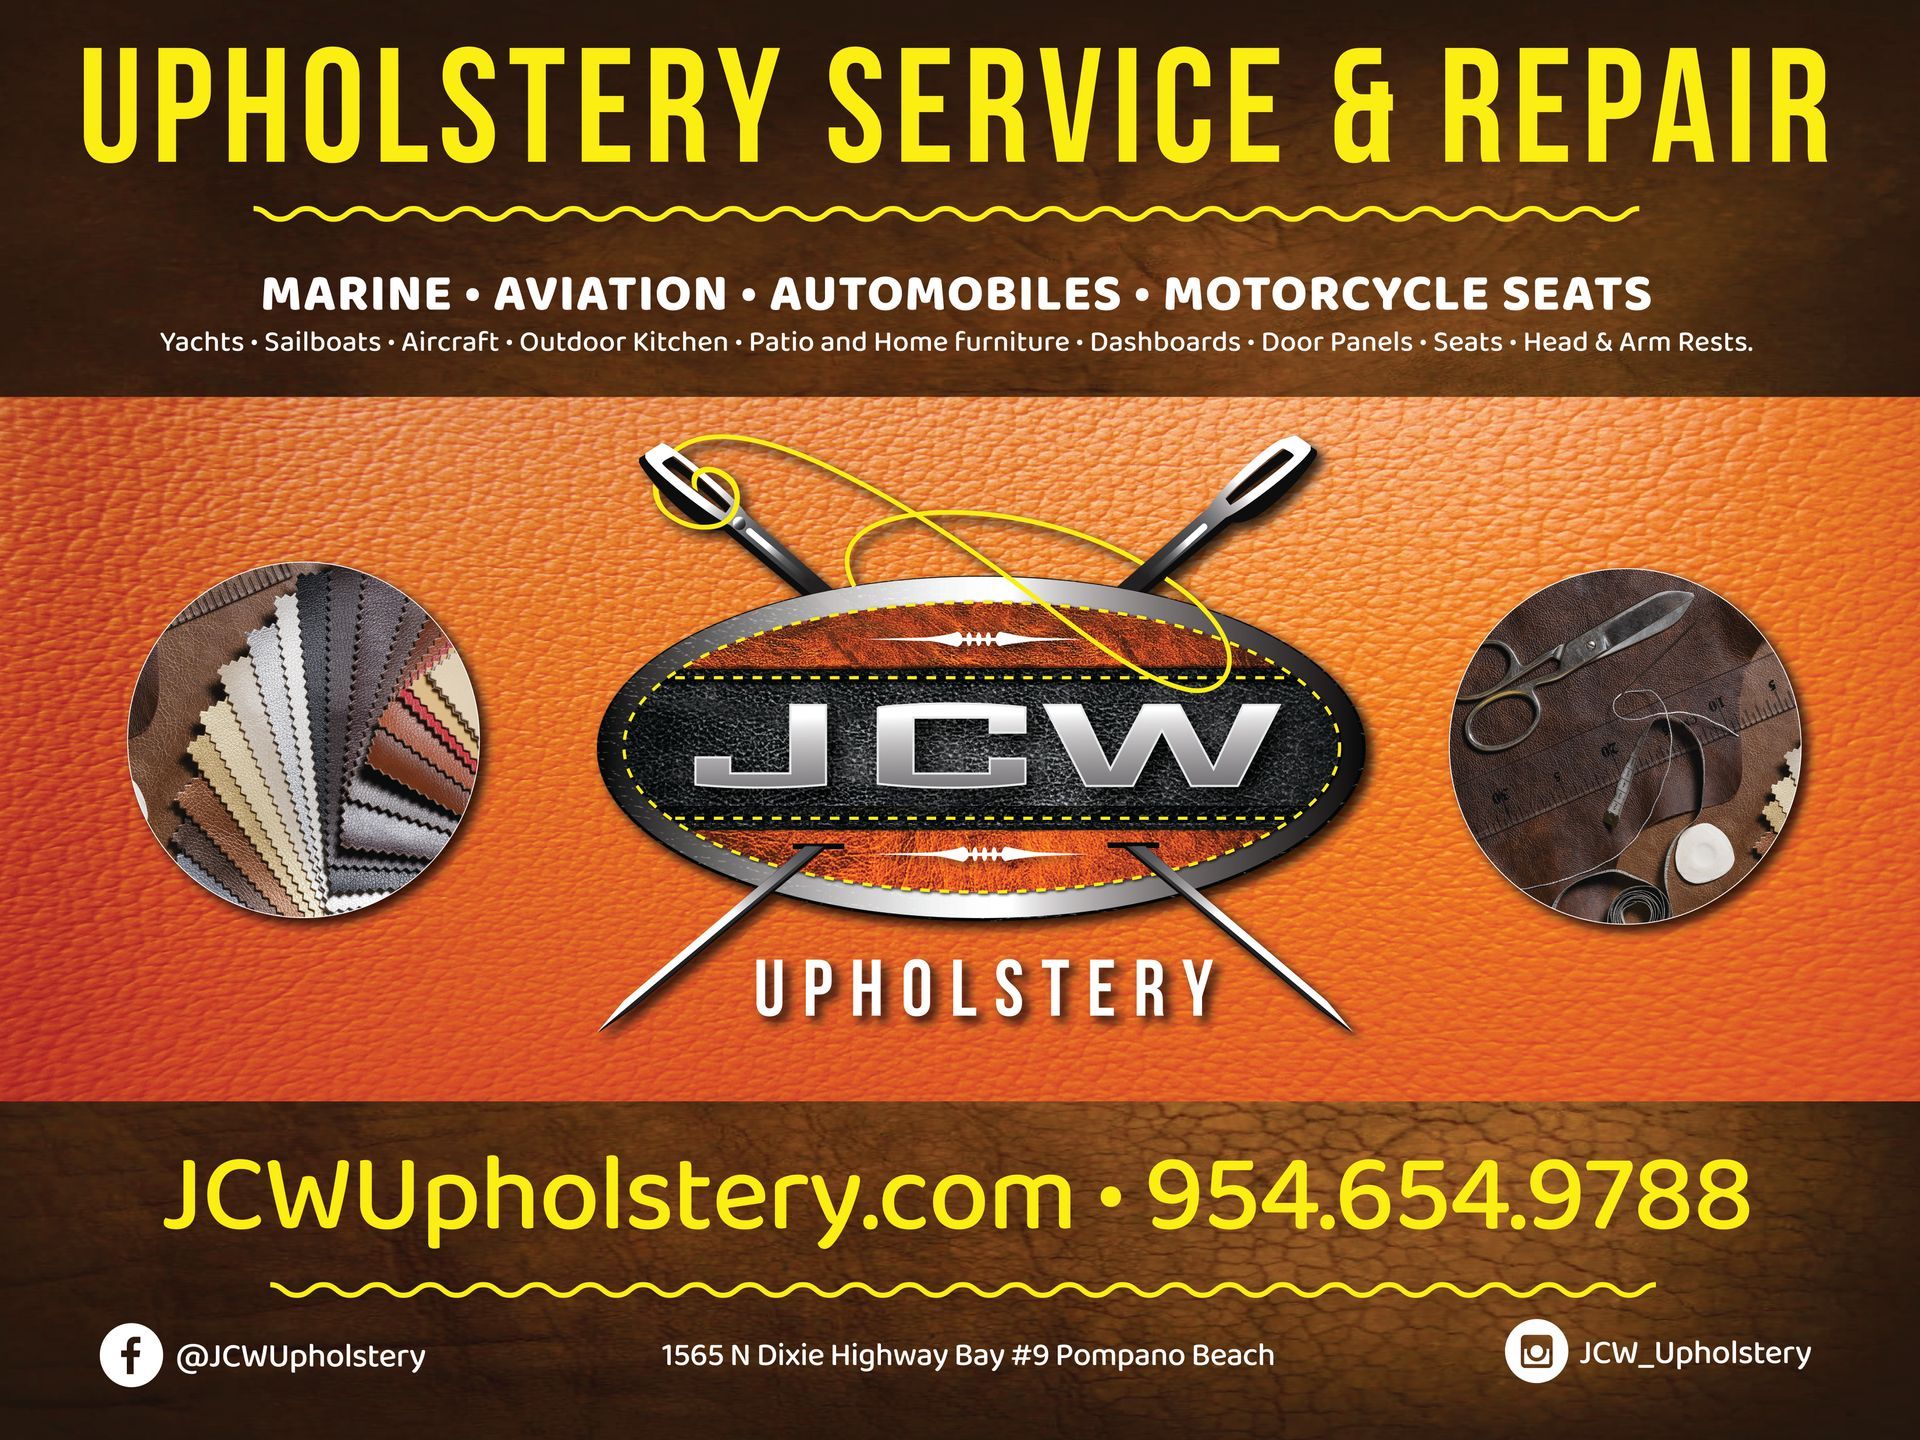 An advertisement for jcw upholstery service and repair